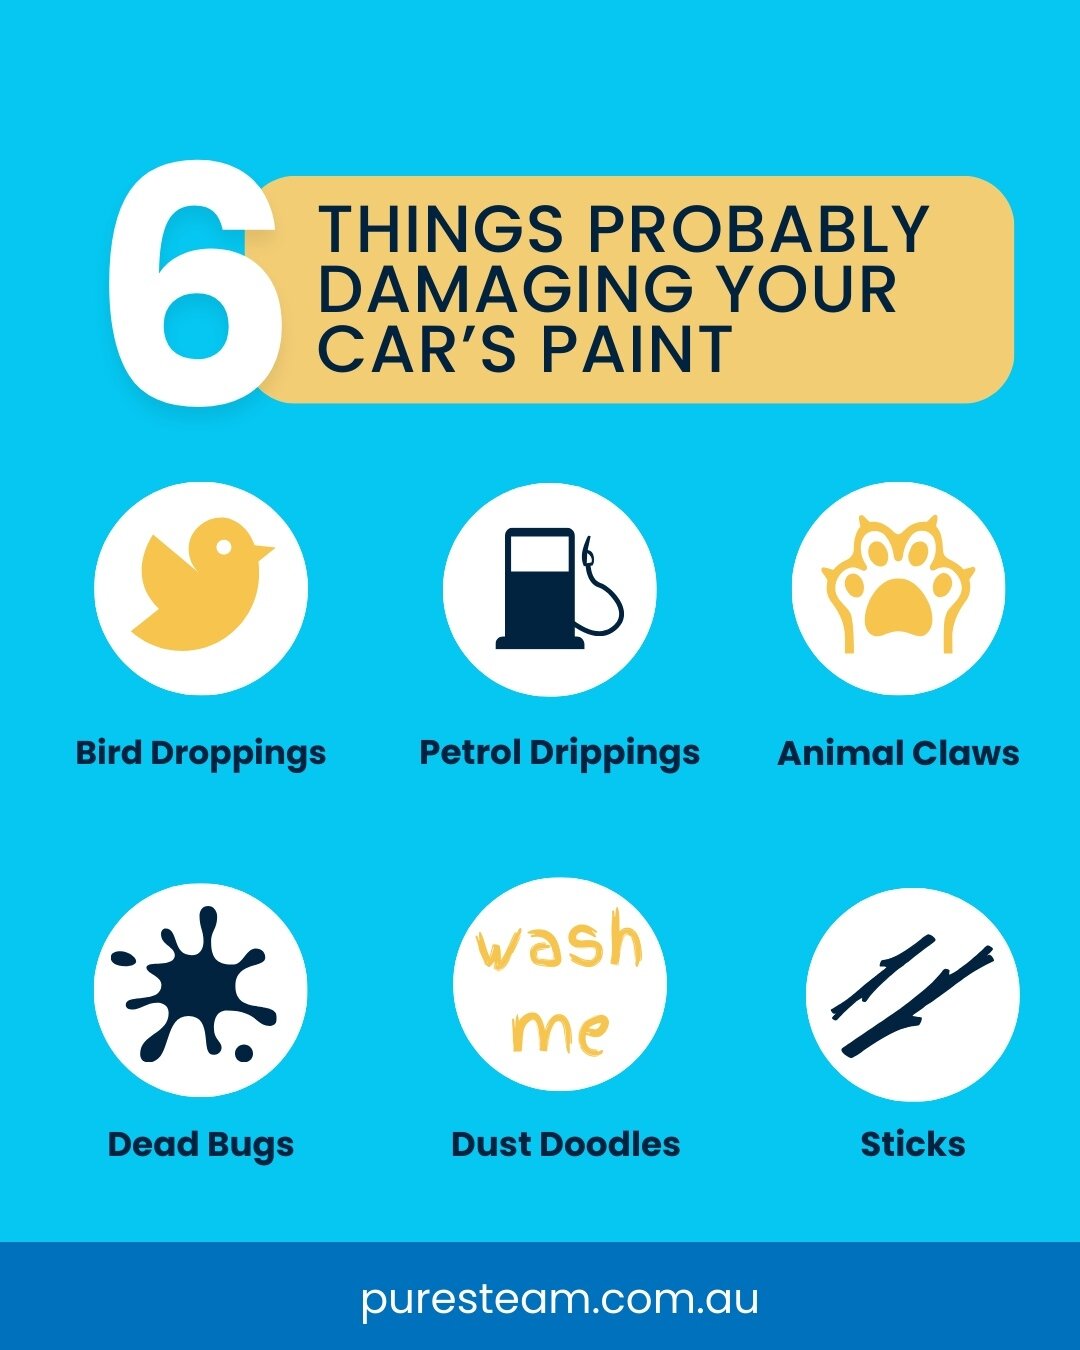 Is it time to think about your poor car suffering from these paint hazards? 🚗⁠
⁠
Bird droppings, animal claws, petrol drips, dirt doodles, bugs, and tree debris can wreak havoc on your car's paint 🐦🐾 ⁠
⁠
To protect your paint finish, it is really 